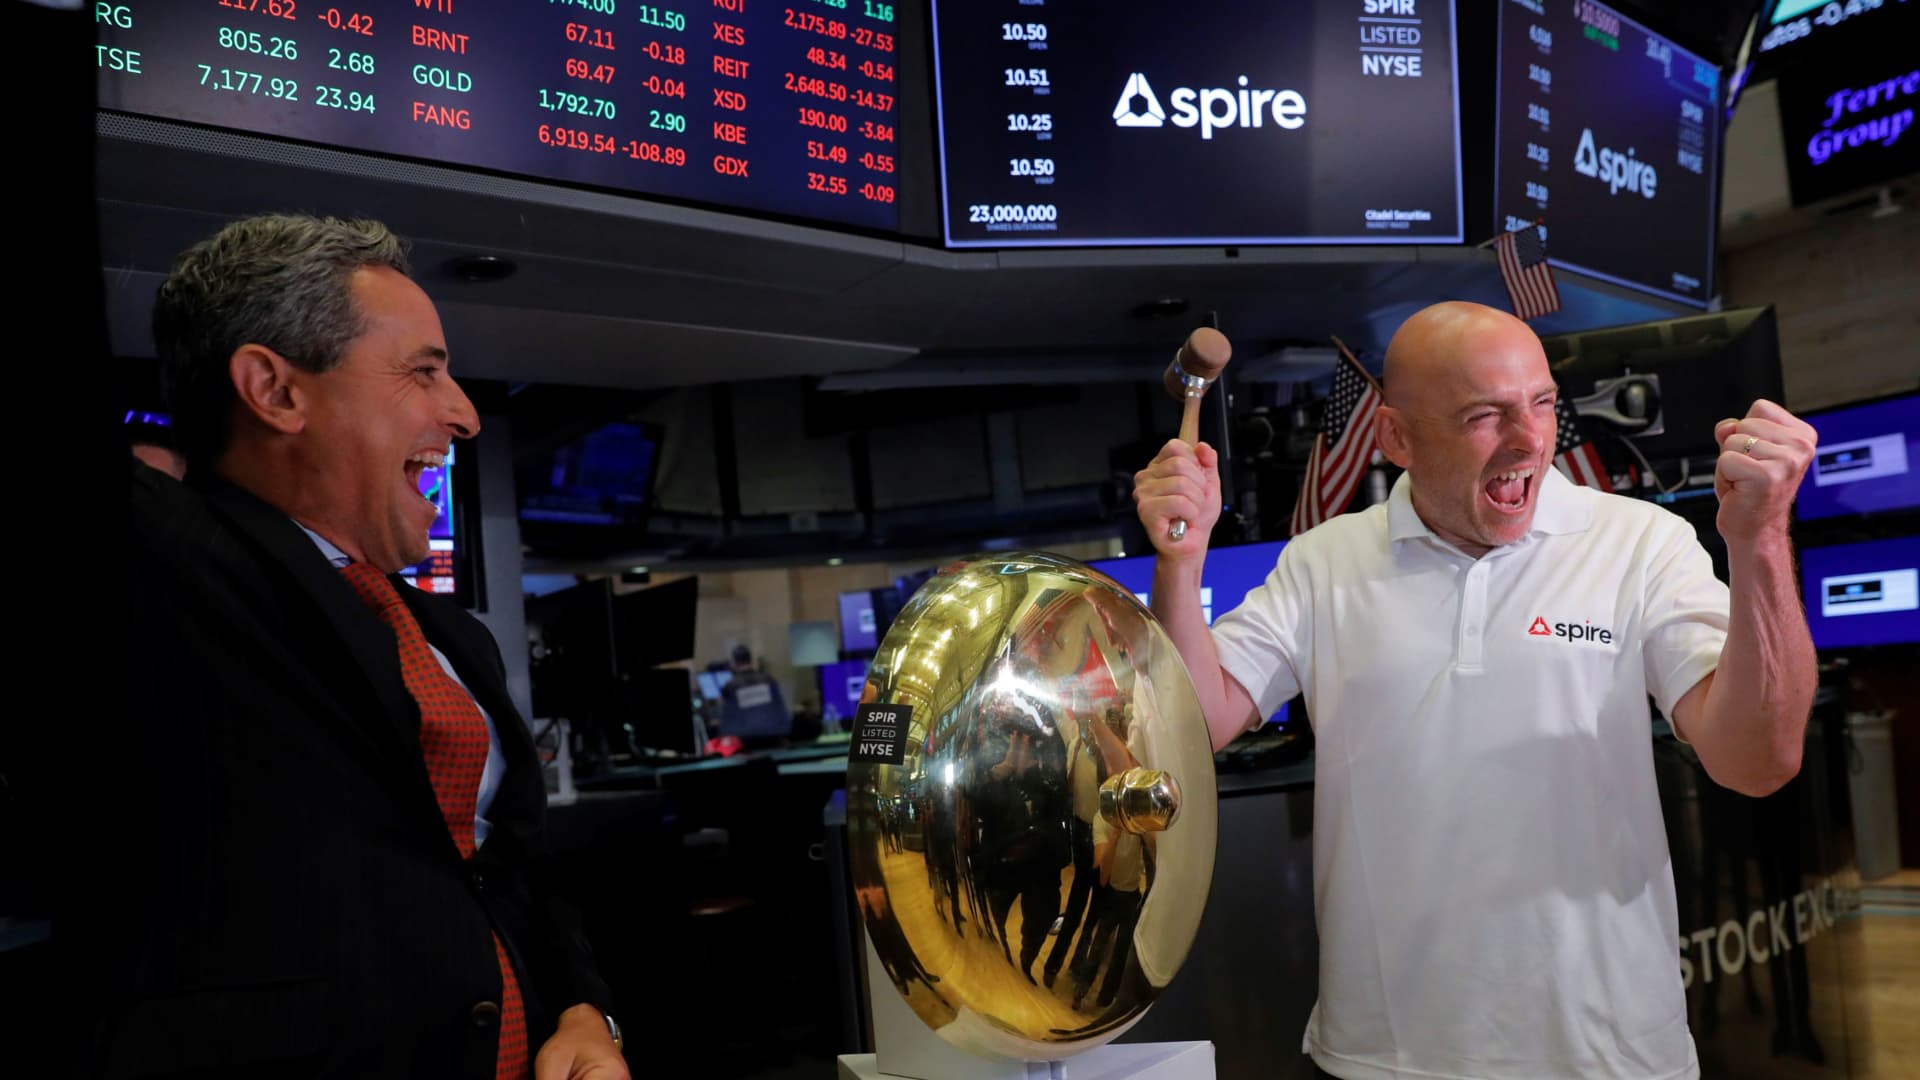 Spire CEO Peter Platzer poses with a ceremonial bell at the New York Stock Exchange (NYSE) during their listing in Manhattan, New York City, U.S., August 17, 2021.